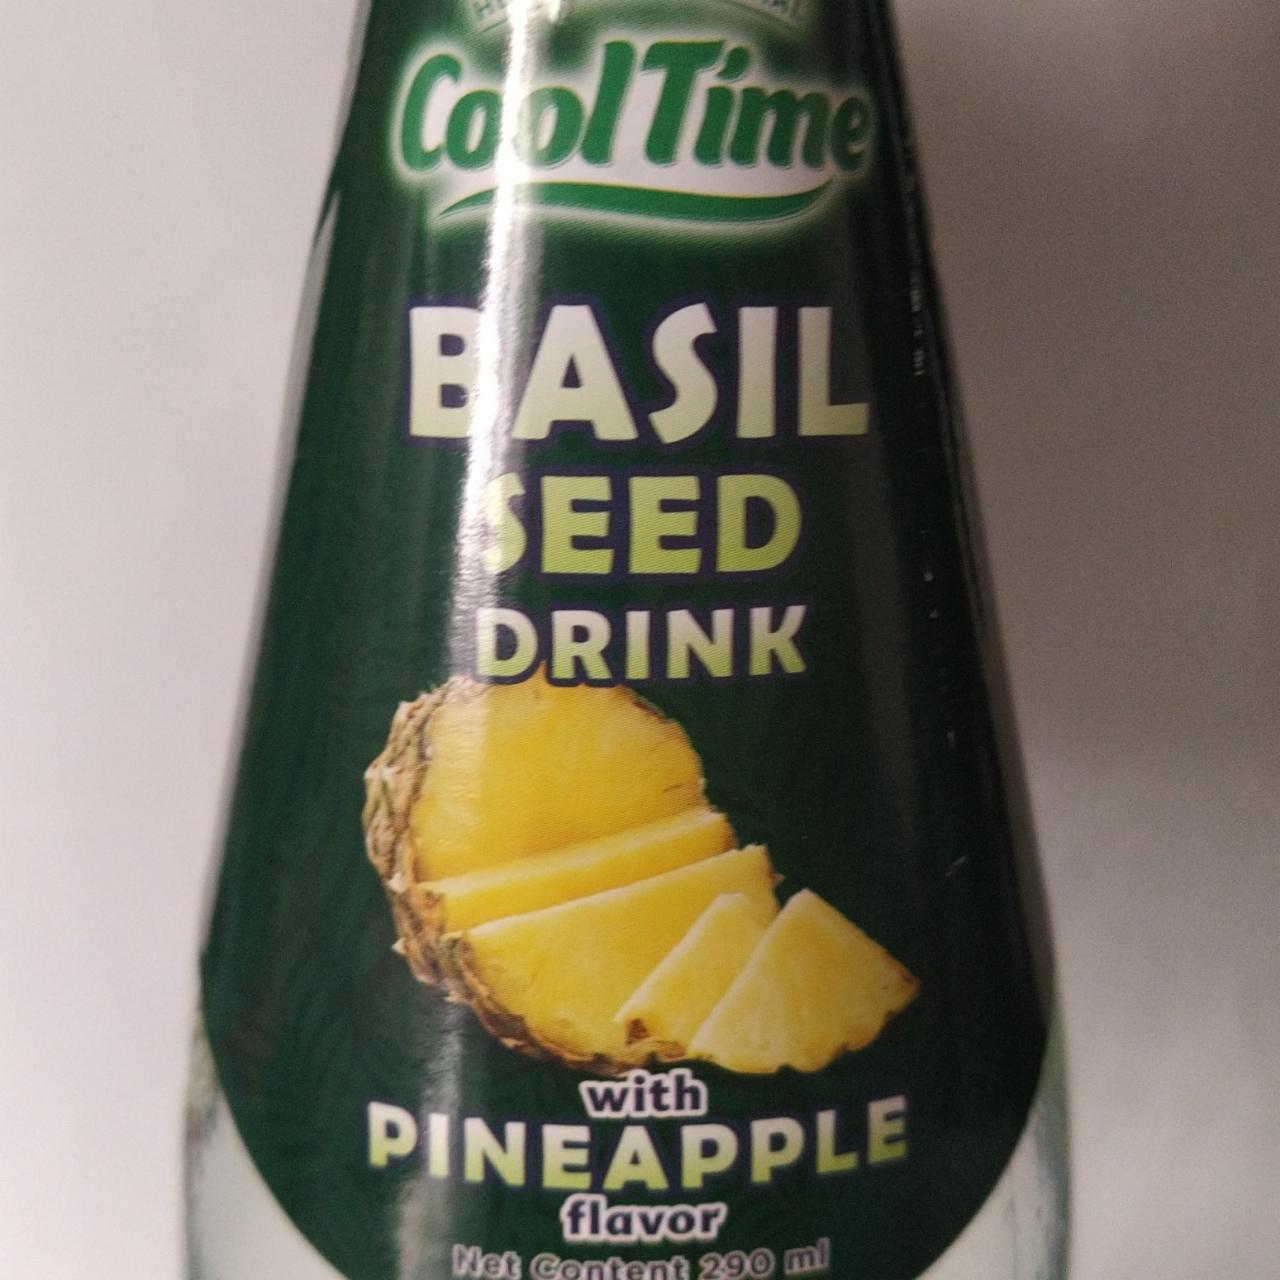 Fotografie - Basil seed drink with pineapple flavor Cool Time